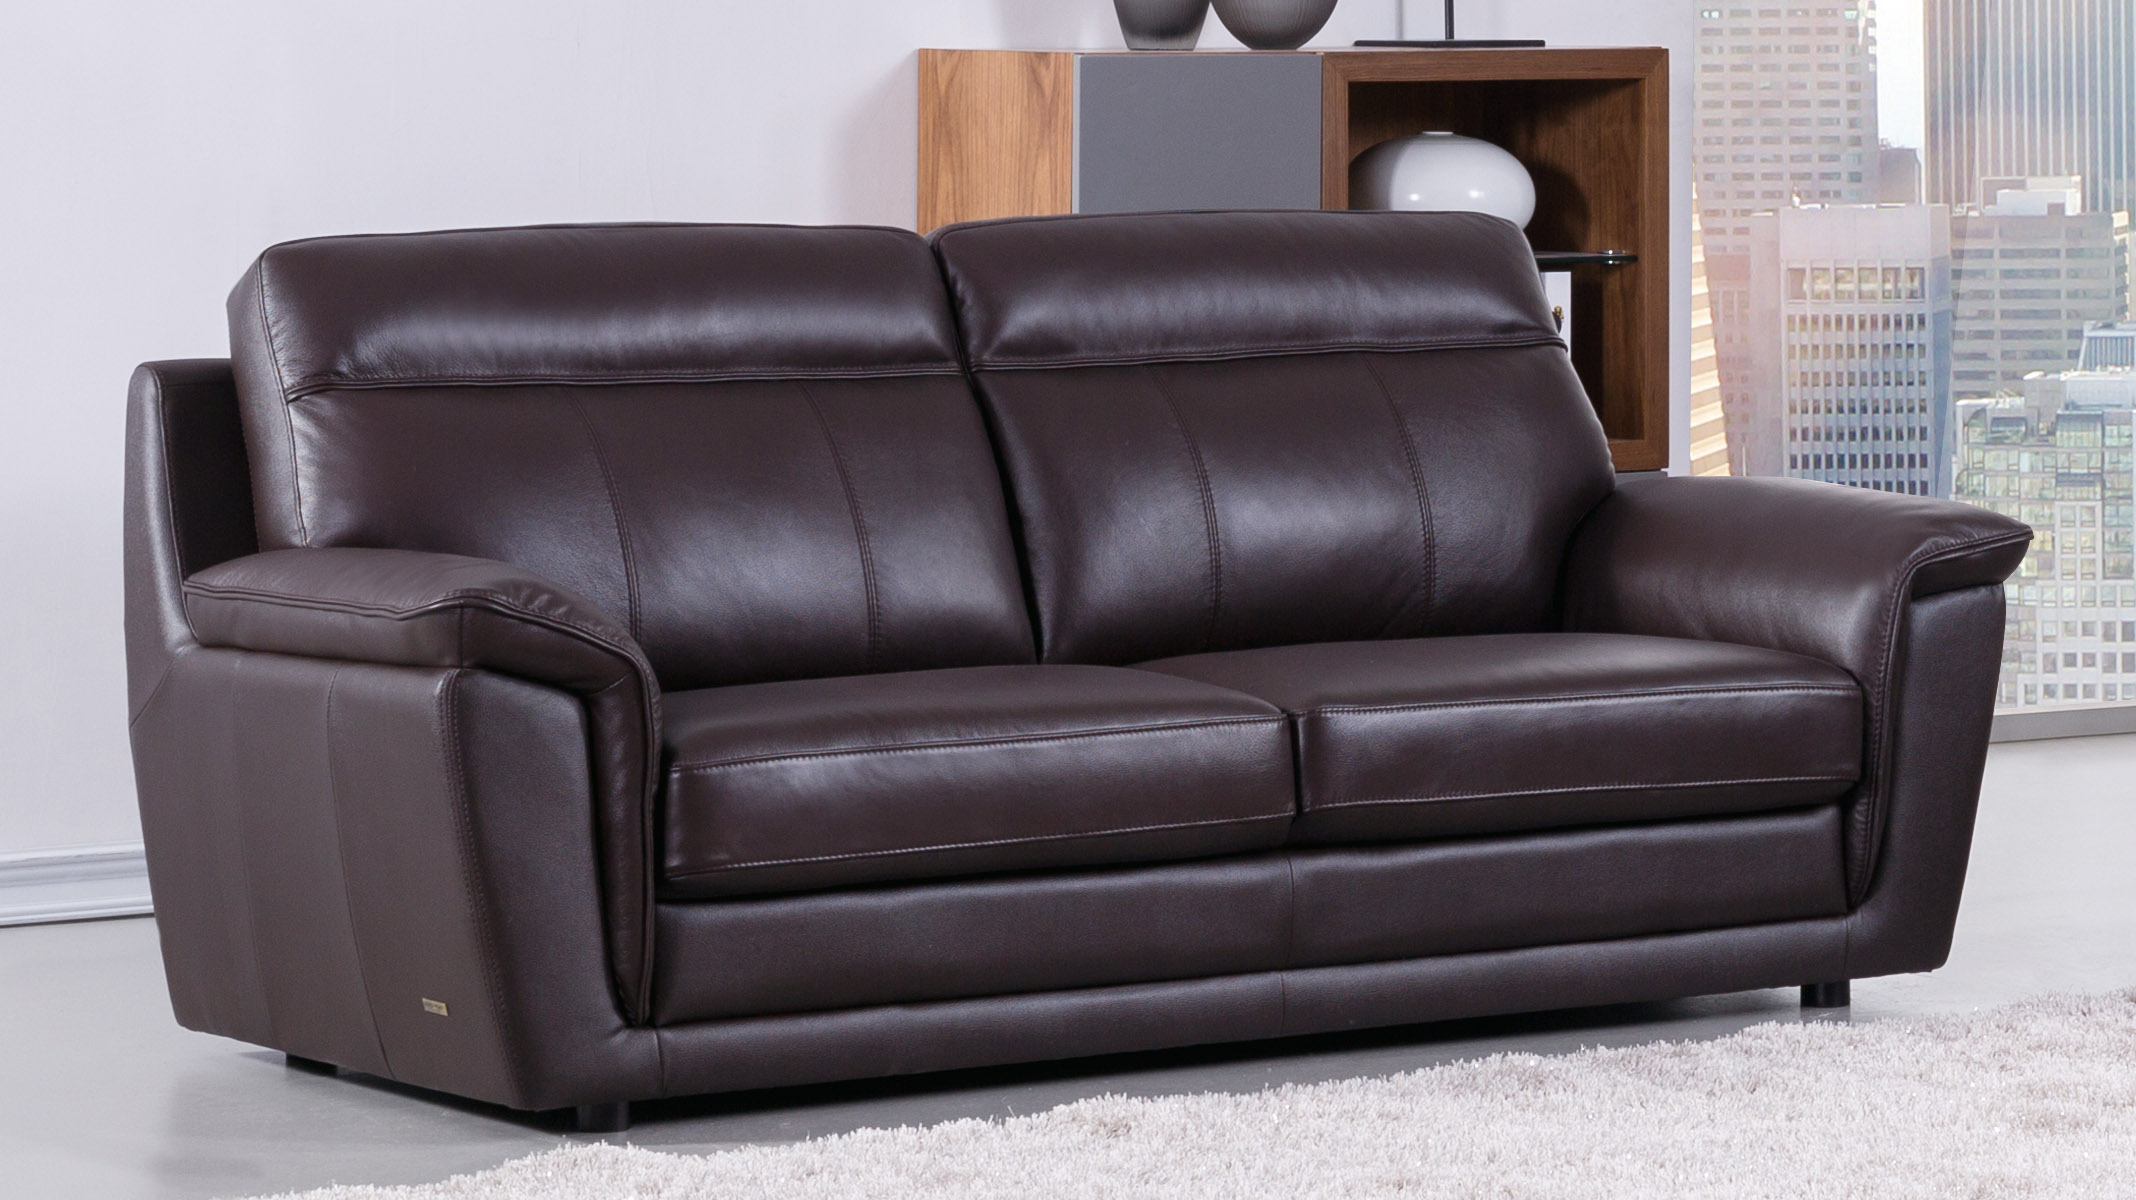 leather sofa set for sale in manila